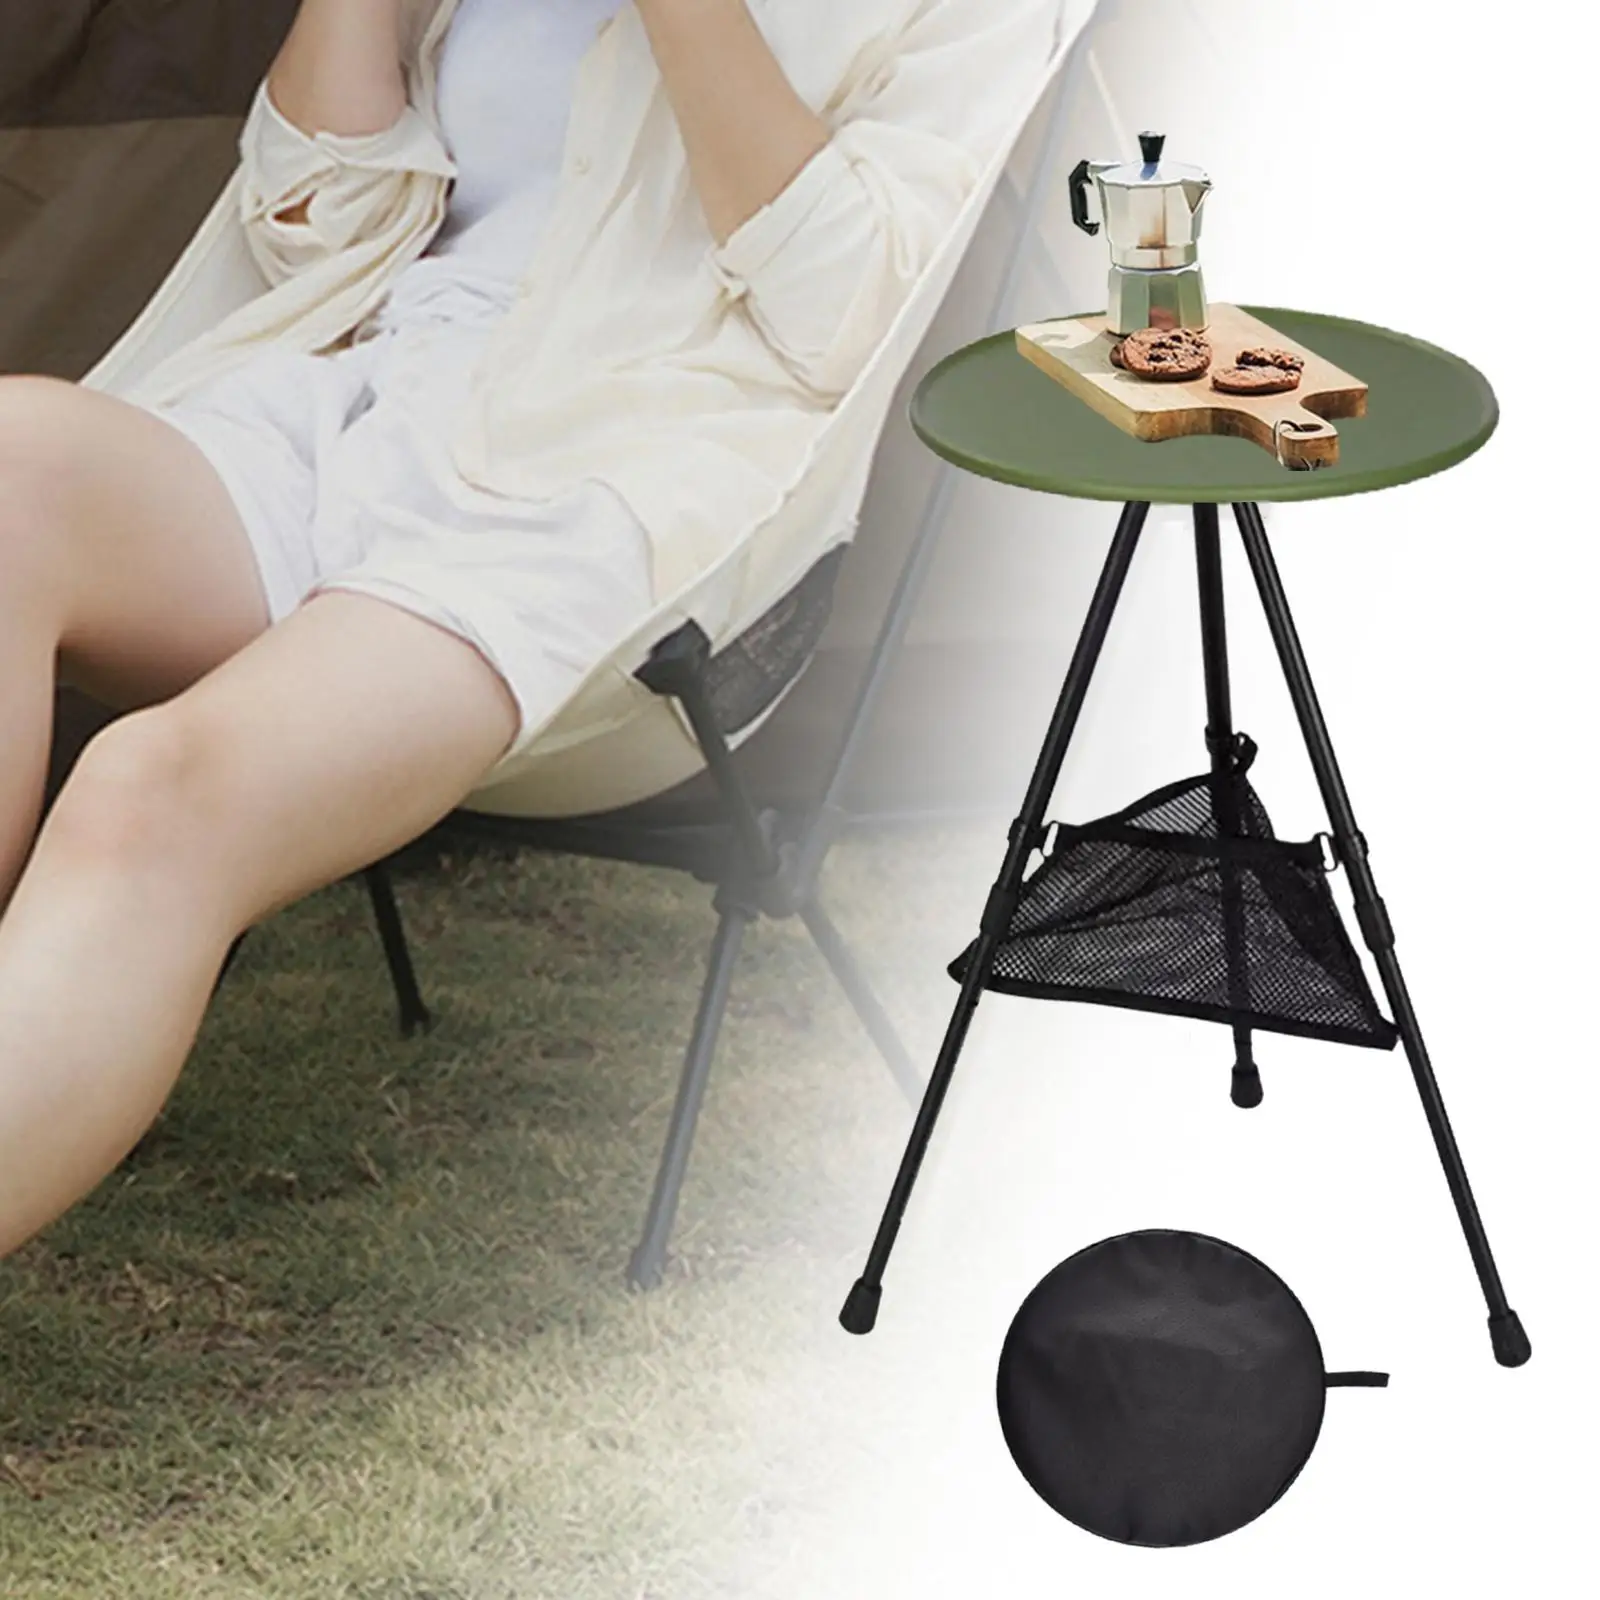 Foldable Picnic Table Portable Tea Coffee Table Folding Camping Table with Tripod Outdoor Round Table for Garden Hiking BBQ